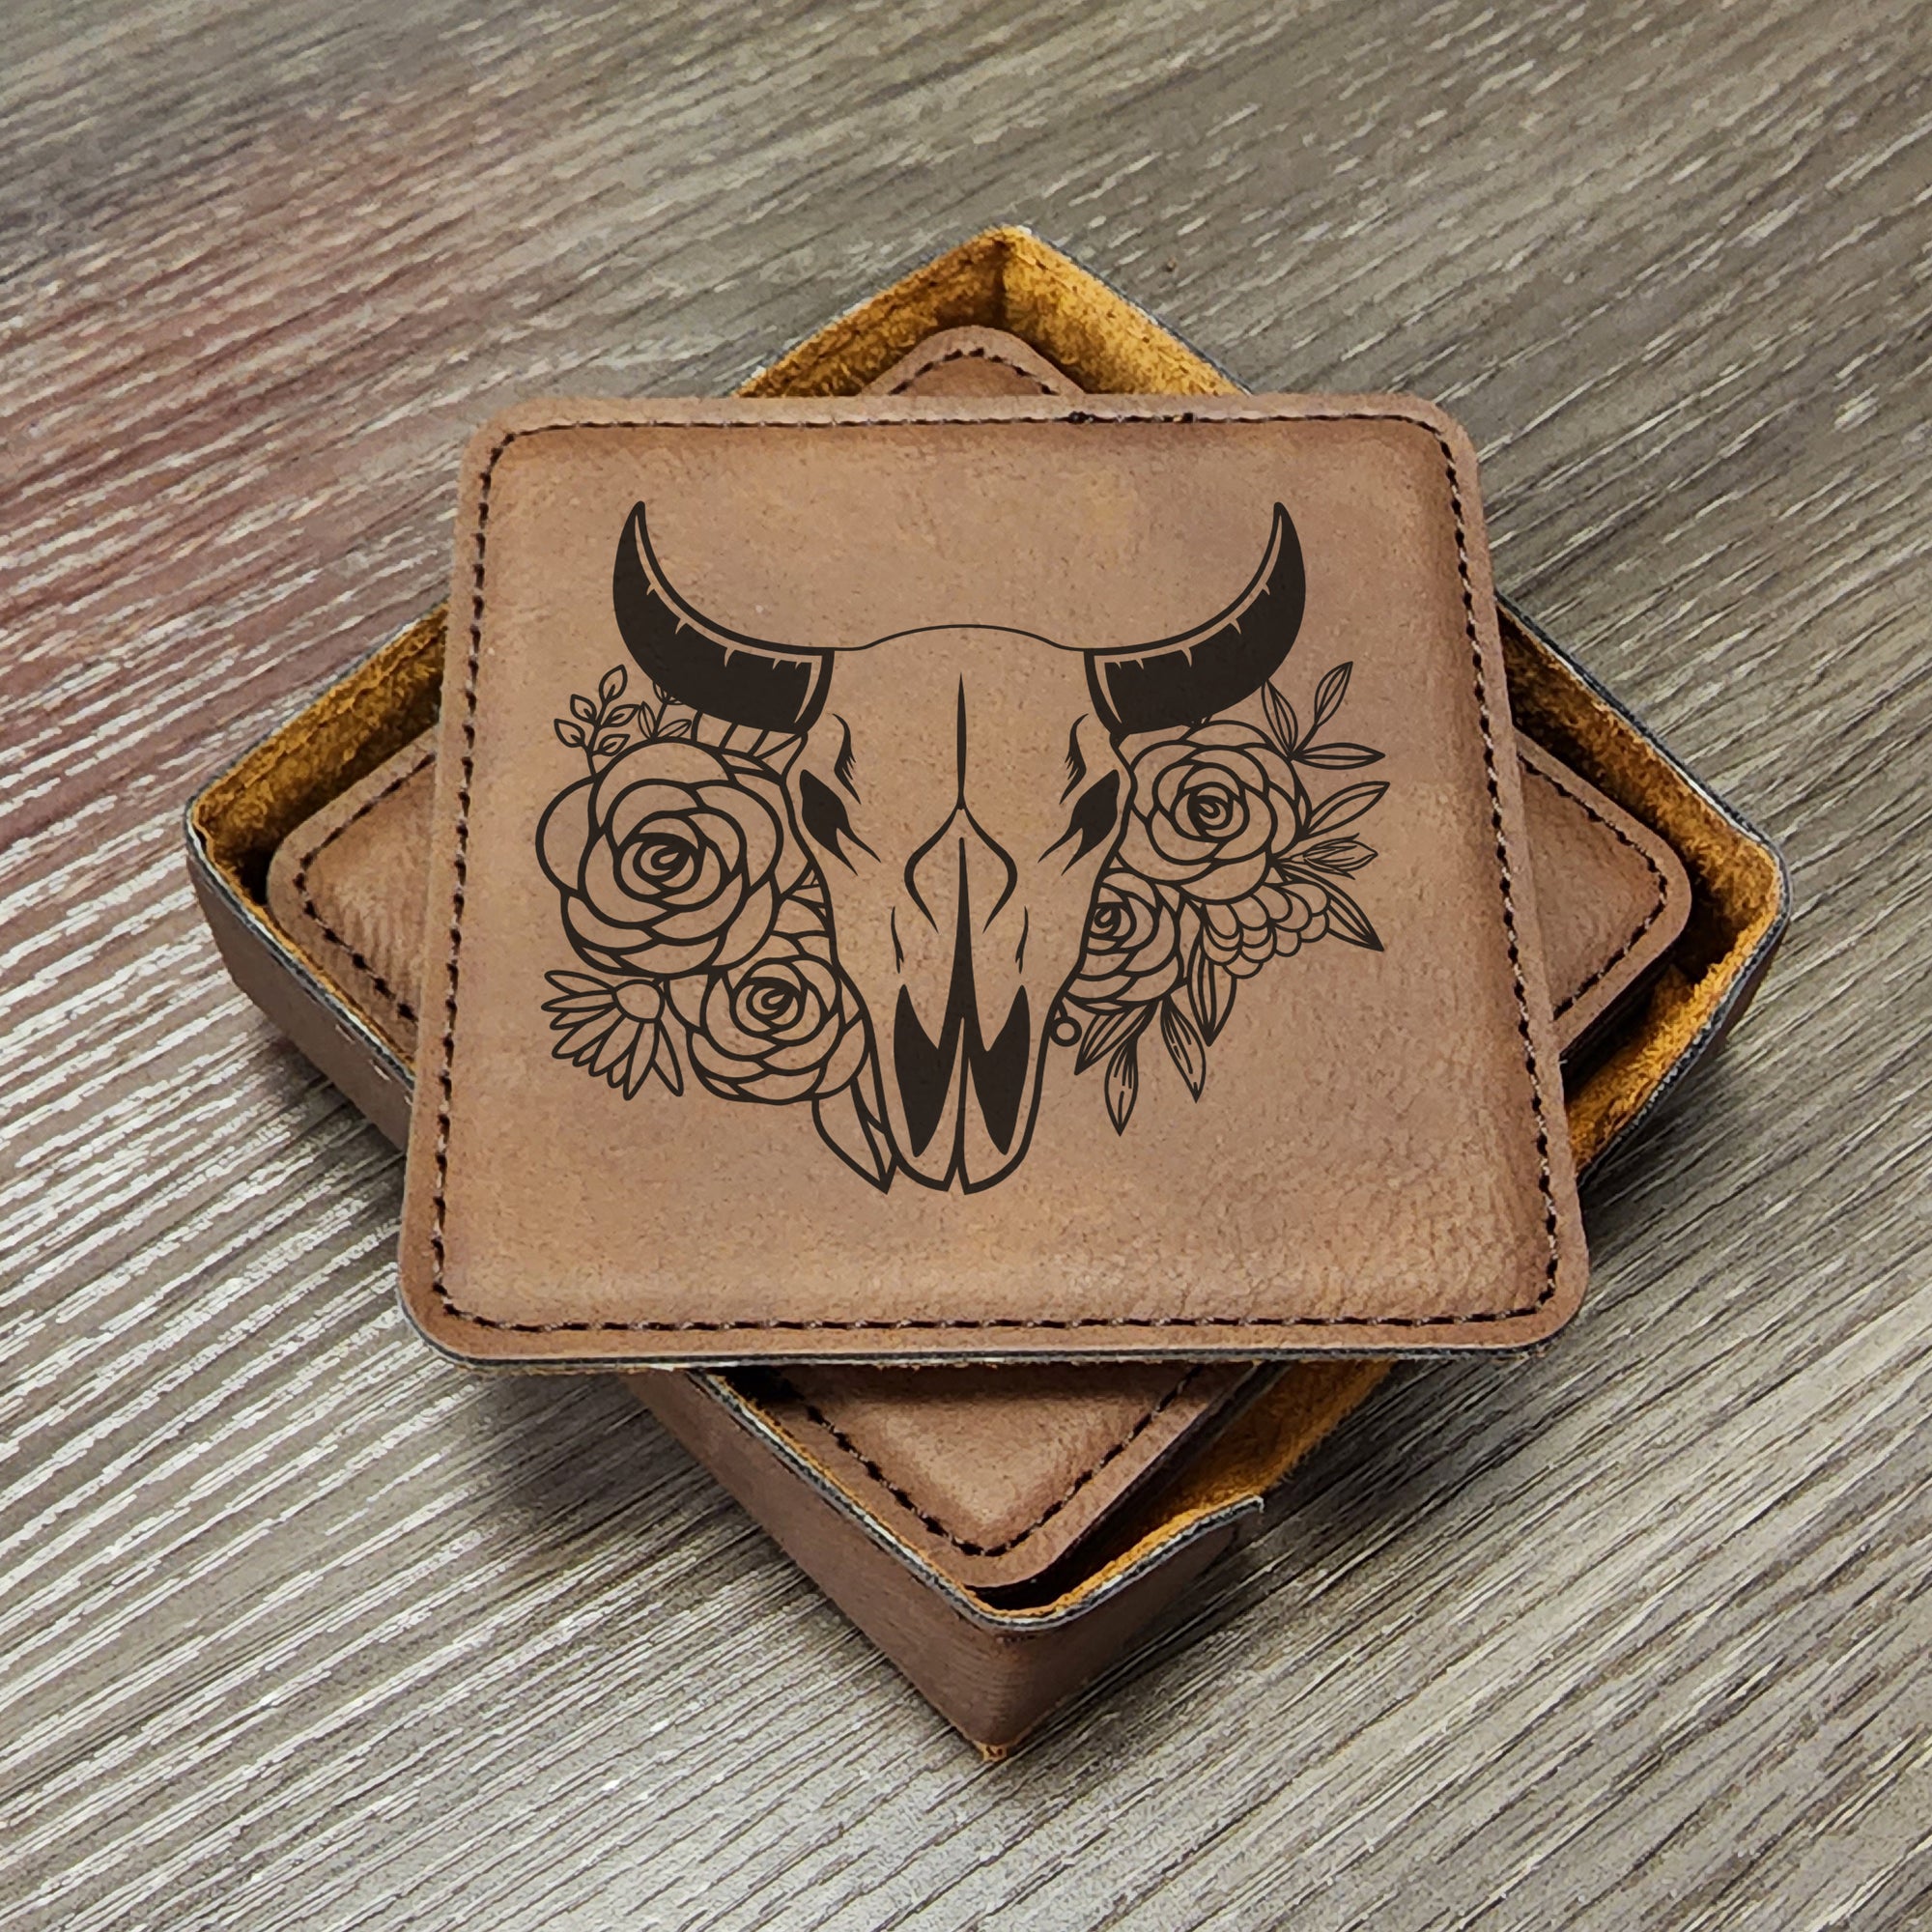 Western Coasters, Flower Cattle Skull Coaster, Beef Farmer Coasters, Cow Skull Coaster, Farmhouse Gifts, Bull Skull, Set of 6 With Holder vrs 2